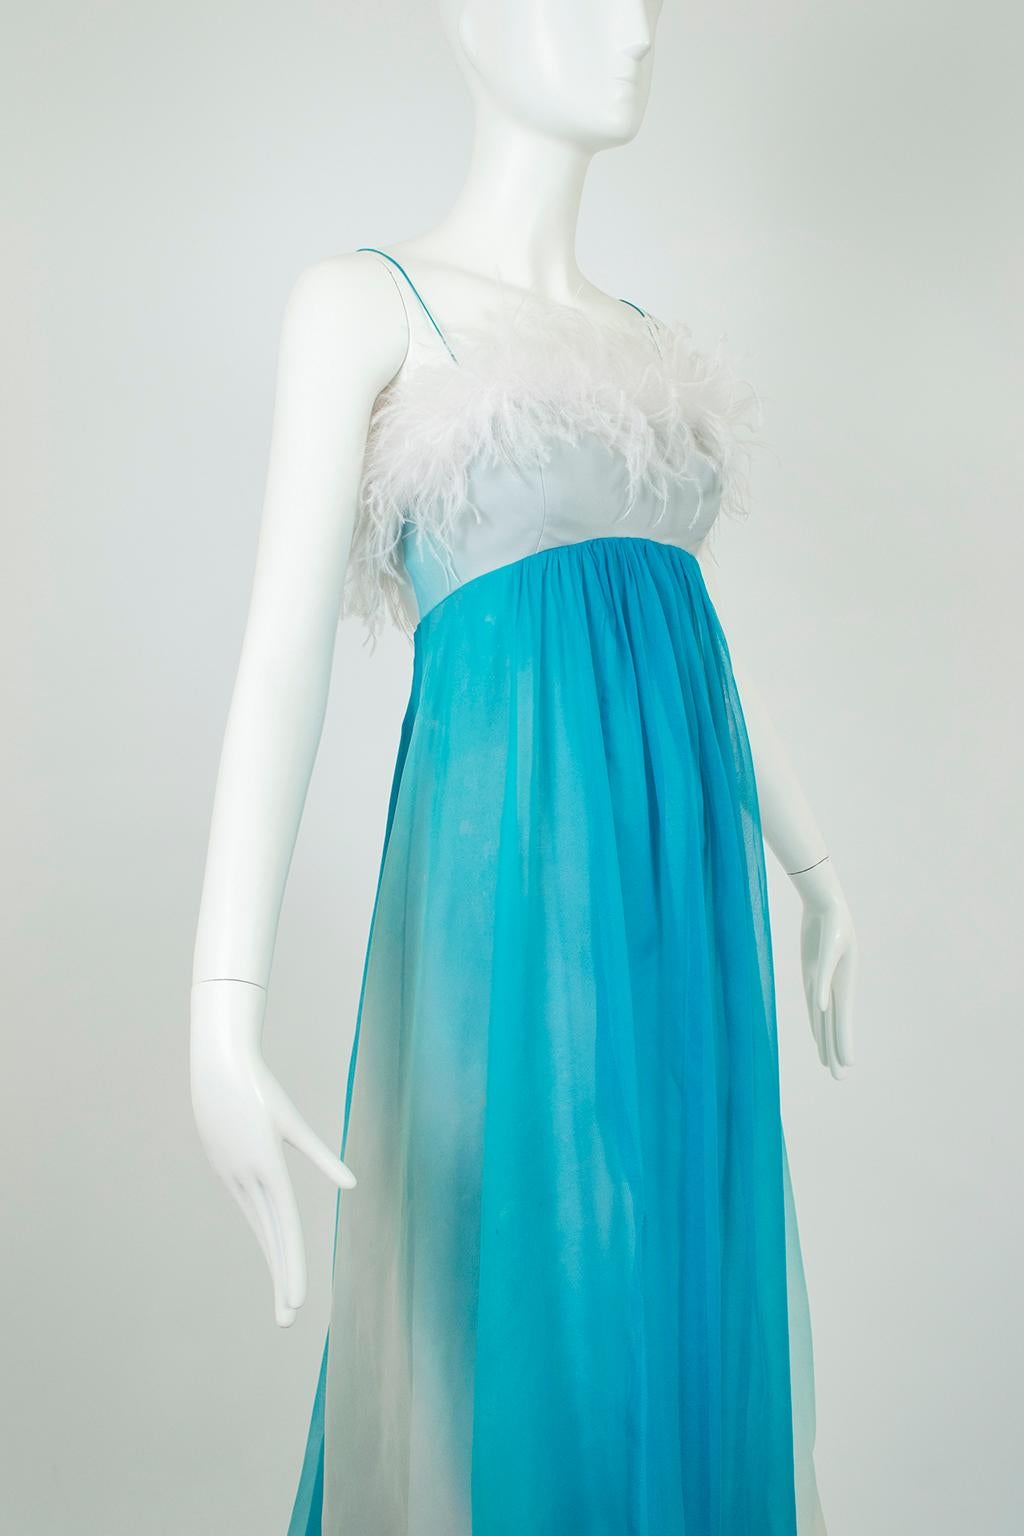 Aqua Ombré Tie Dye Chiffon Ball Gown with Ostrich Feather Trim – XS, 1960s In Good Condition For Sale In Tucson, AZ